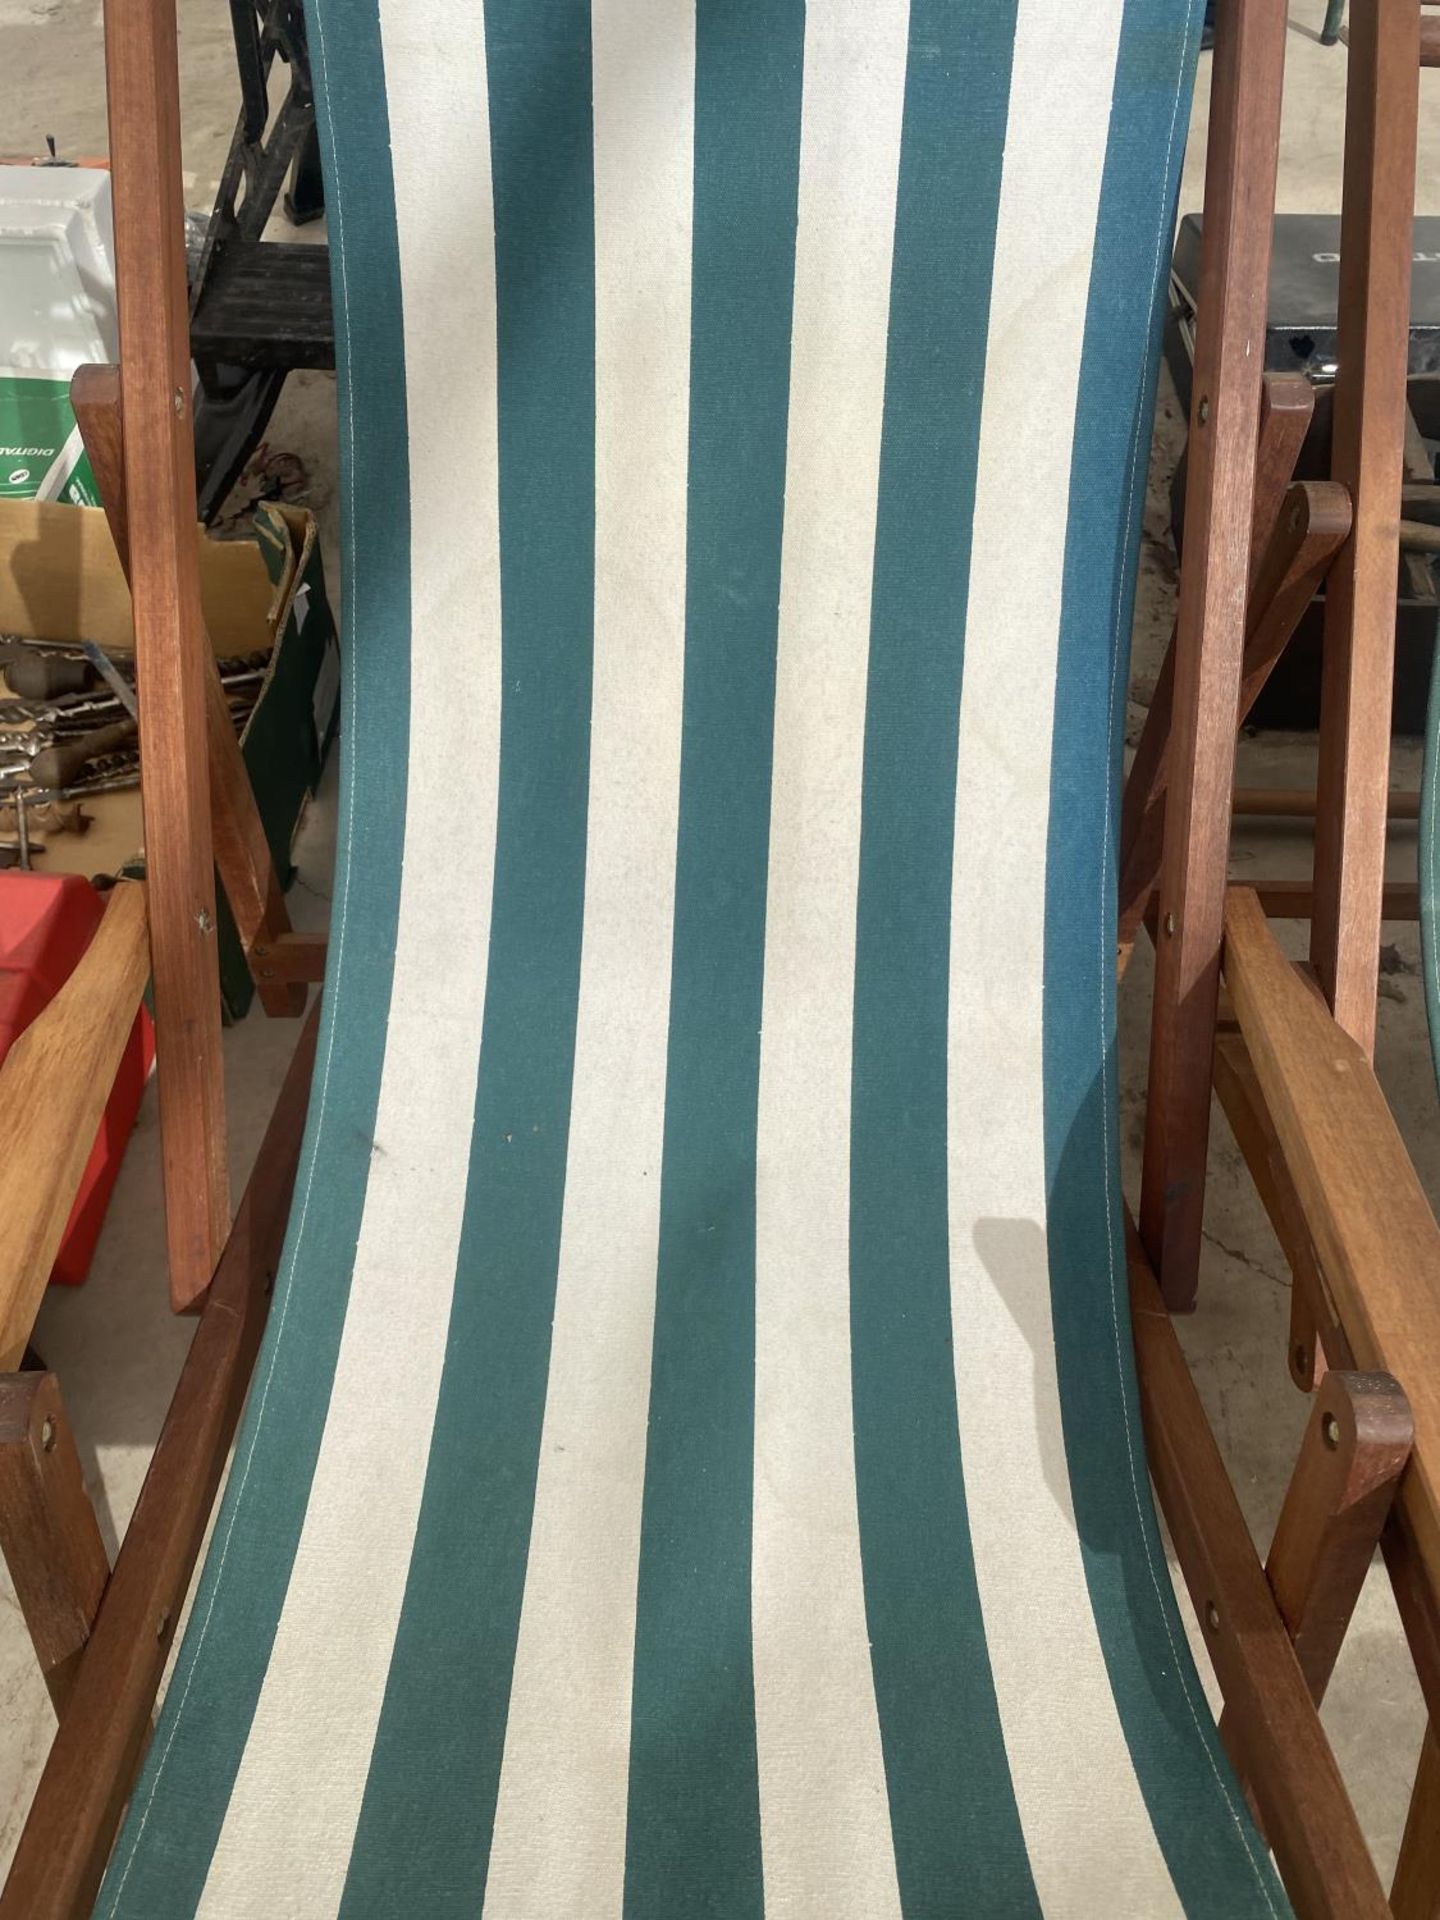 A PAIR OF WOODEN FRAMED DECK CHAIRS - Image 3 of 3